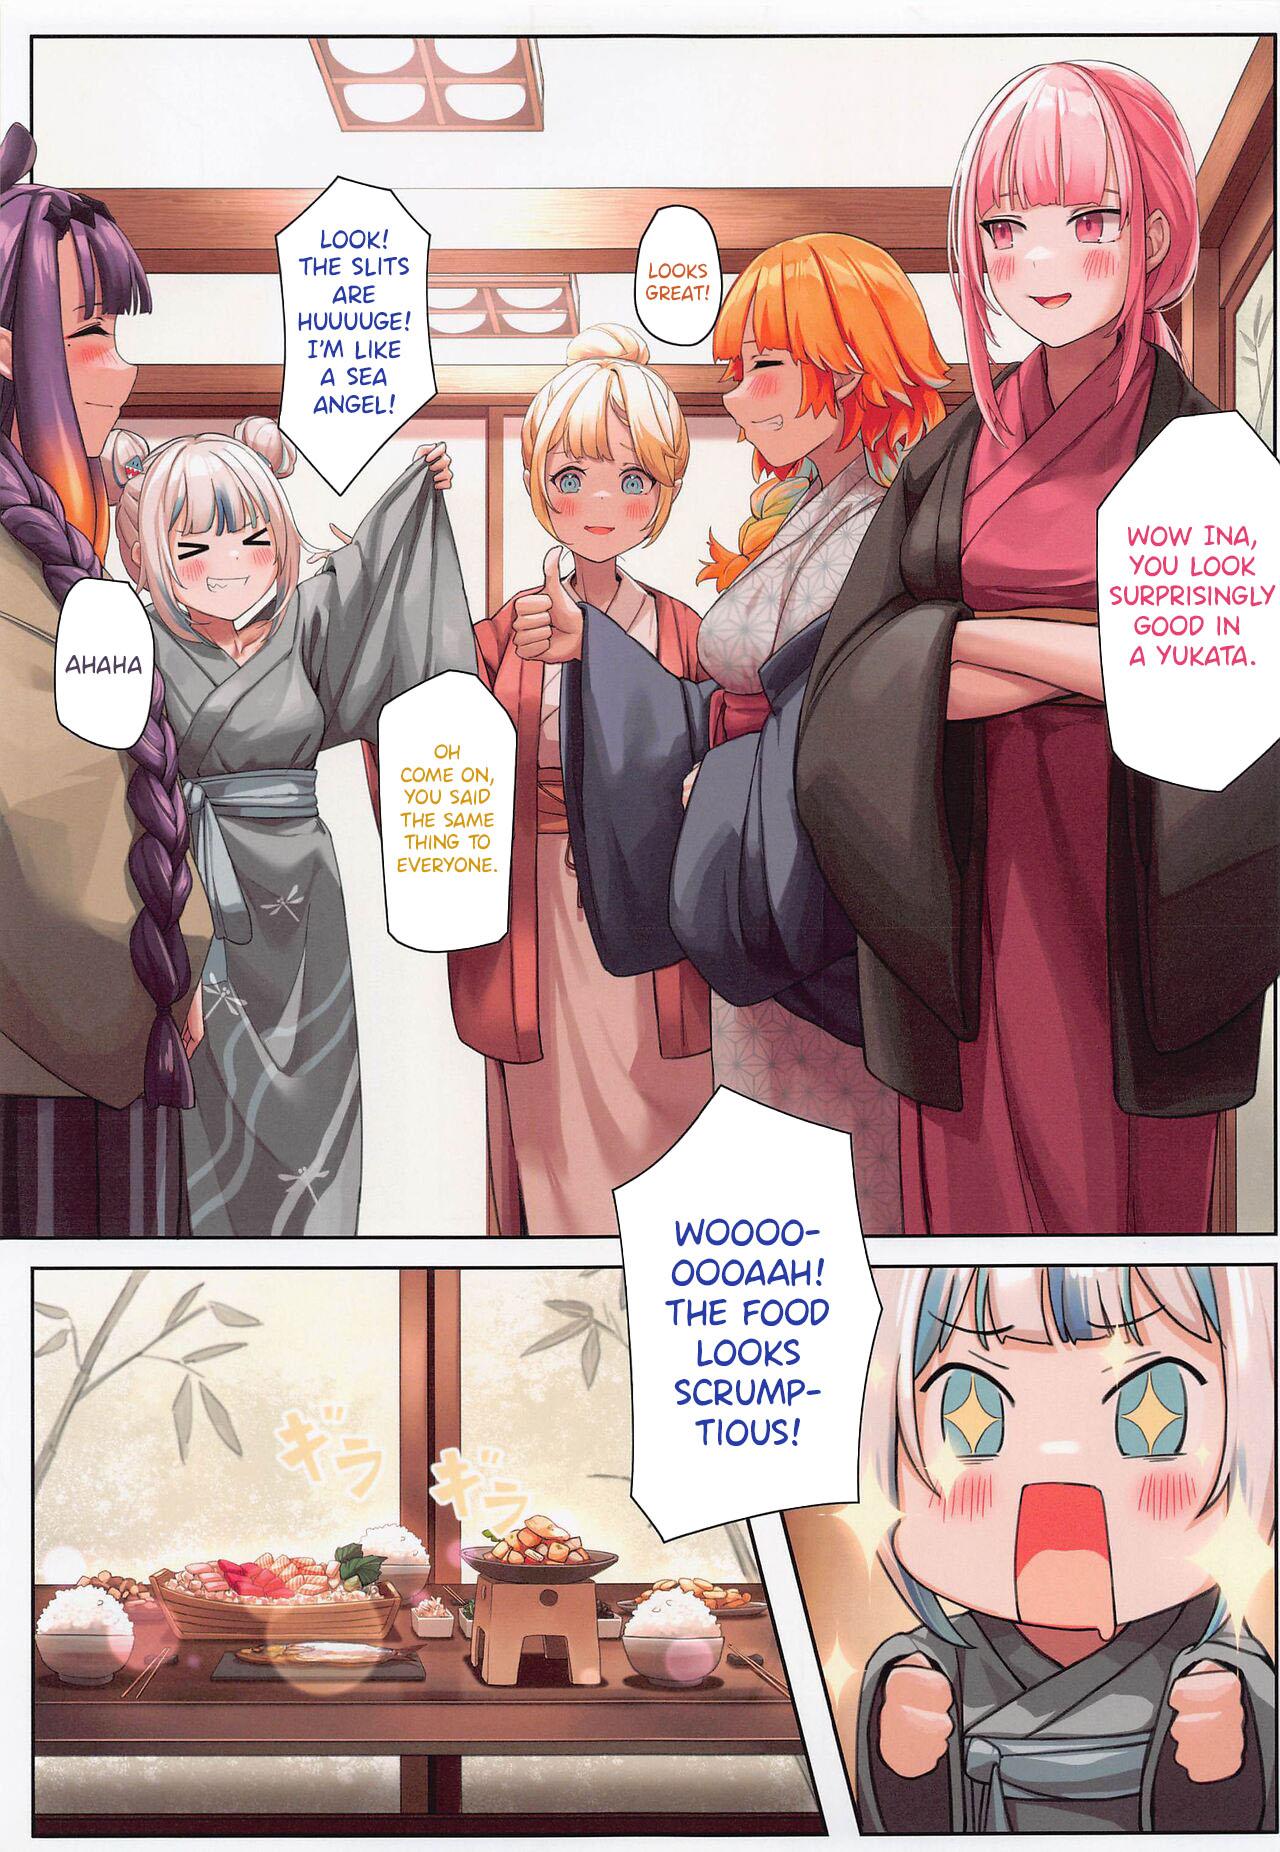 Assgape AmeSame Onsen Ryokou no Iroiro | The Many Happenings of AmeSame's Hot Spring Trip - Hololive Work - Page 6